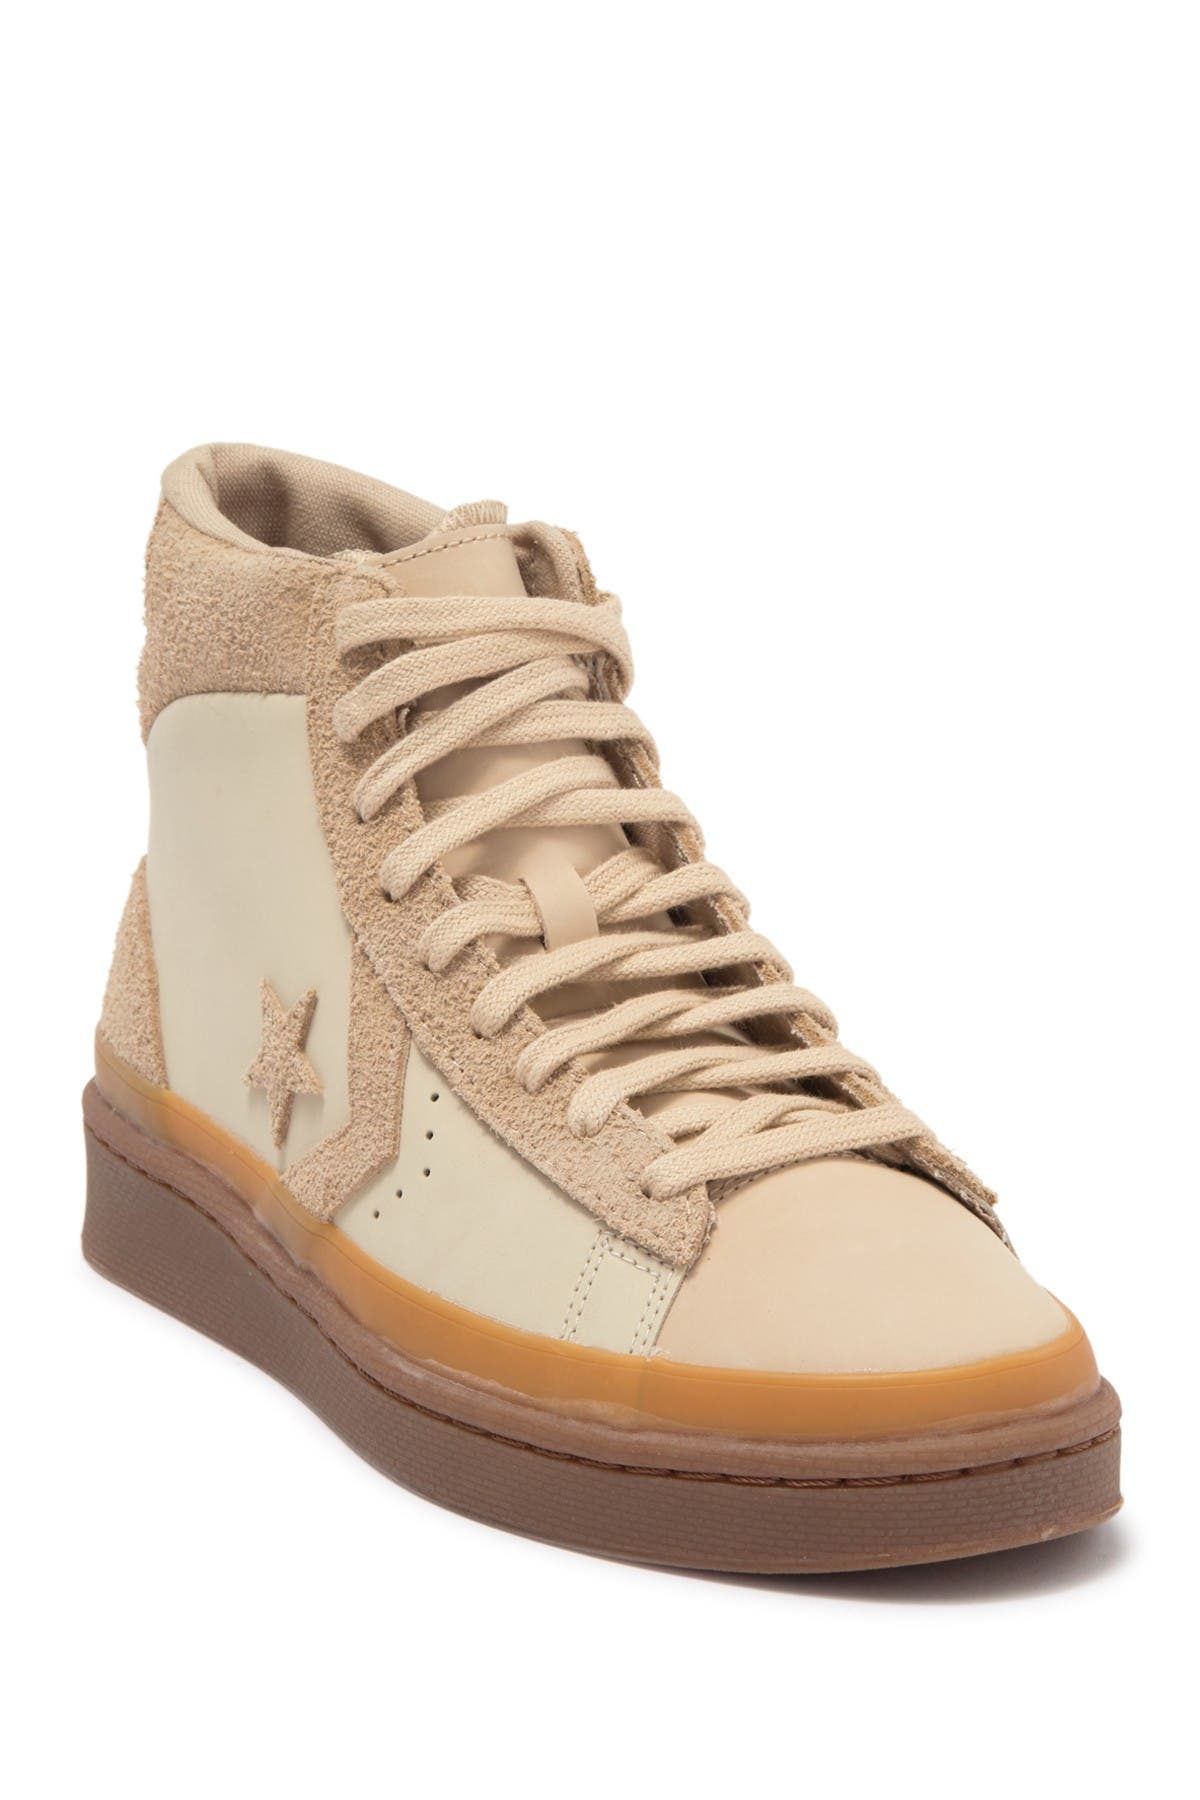 converse pro leather high top